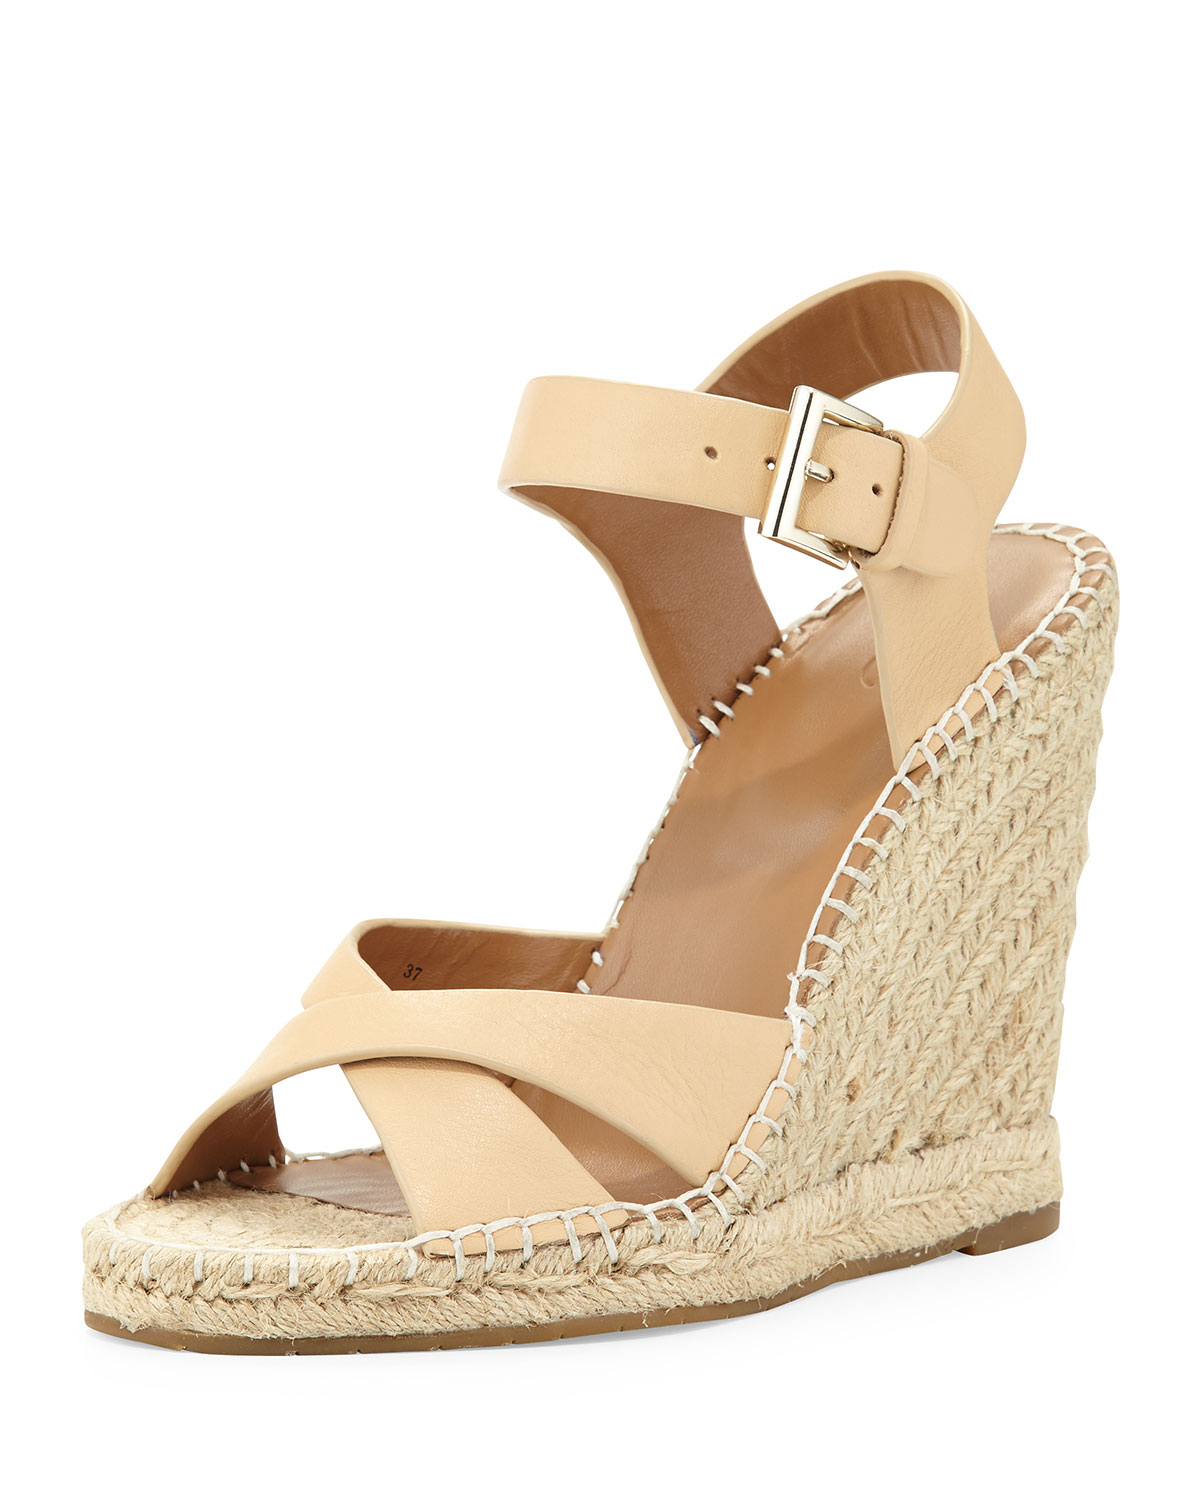 joie-nude-lena-leather-espadrille-sandal-beige-product-1-852282556-normal